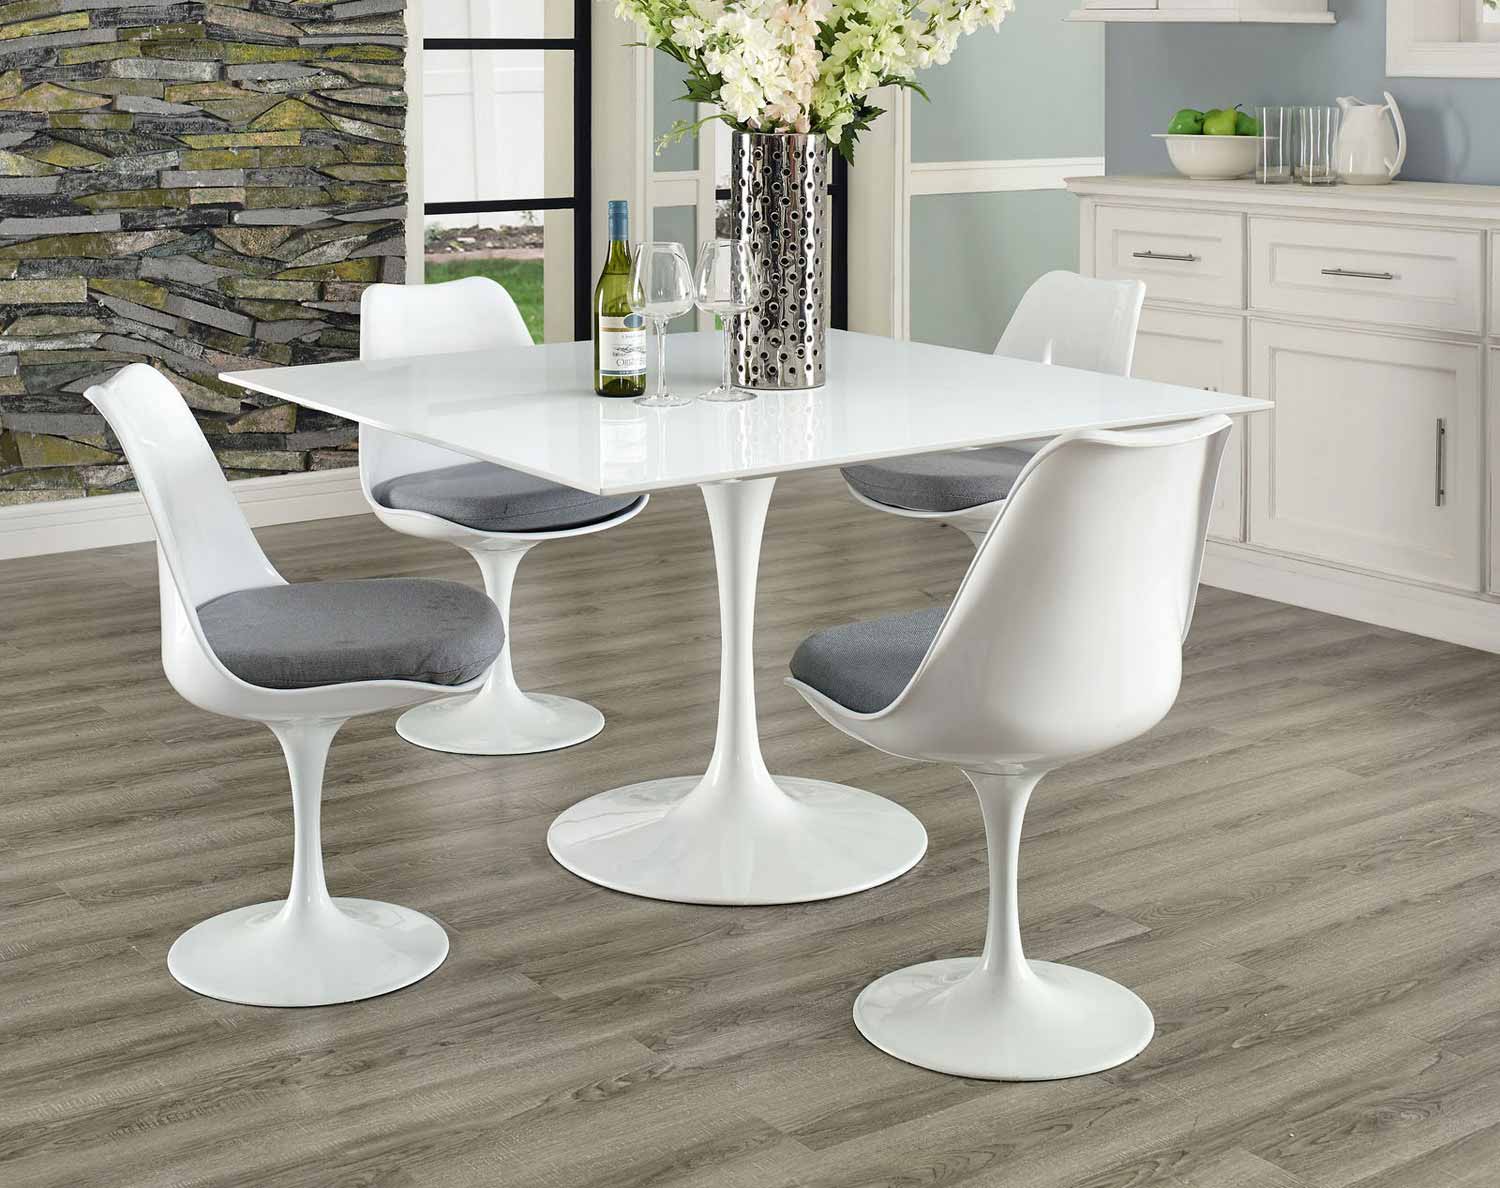 Modway Lippa 47 Square Wood Top Dining Table - White